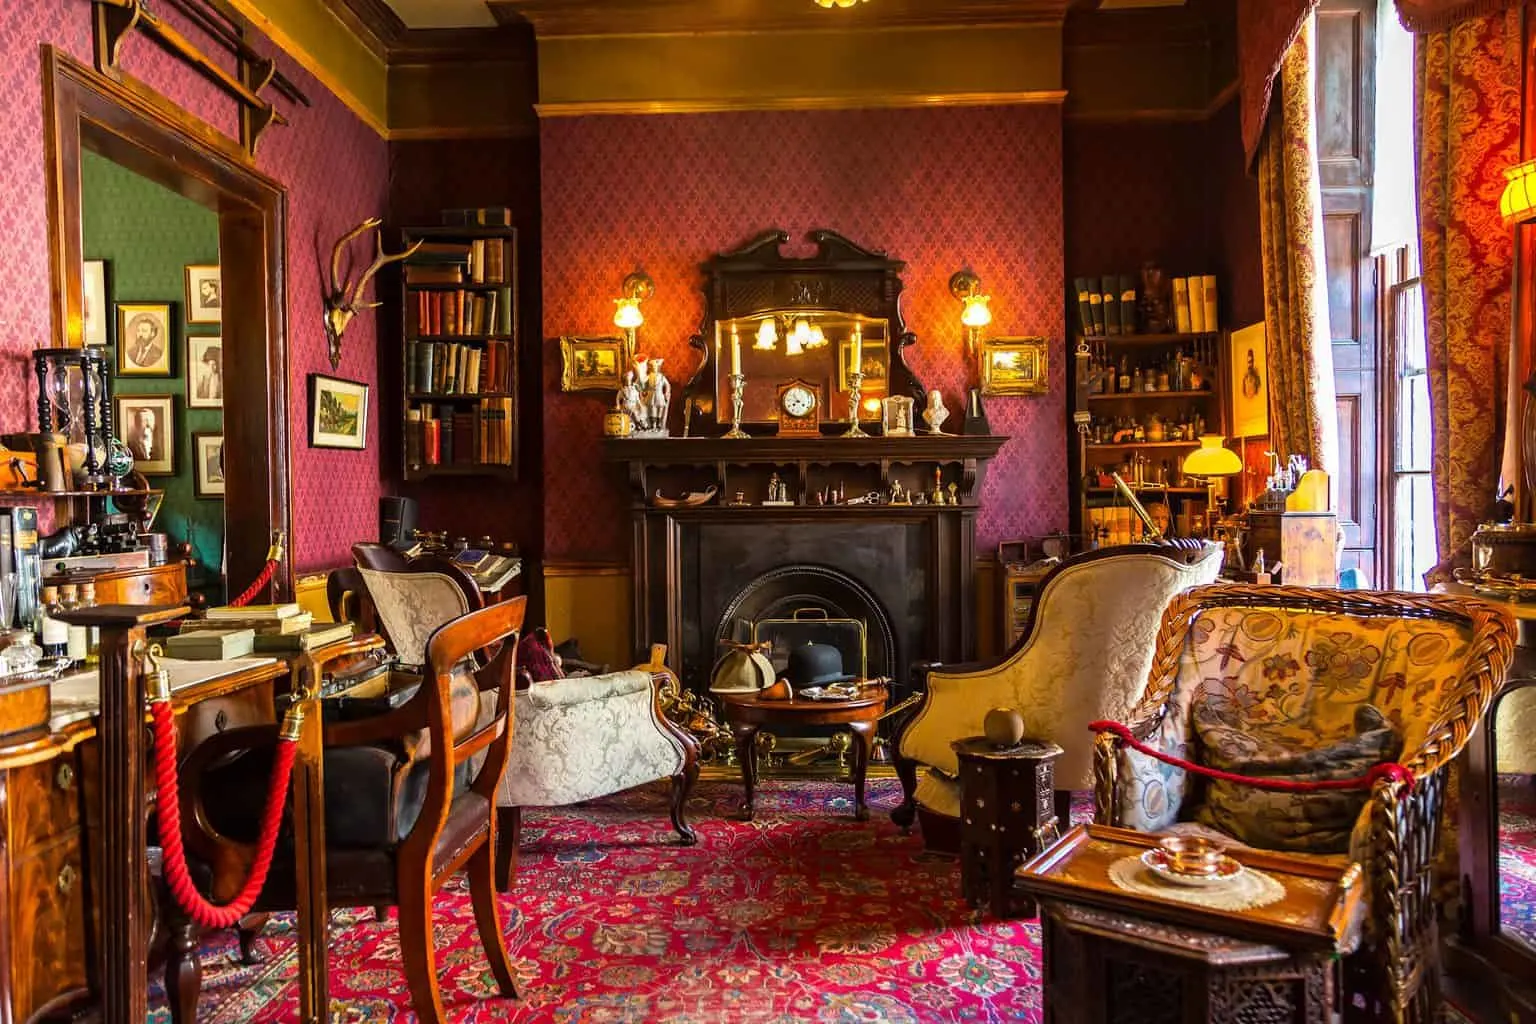 Stop by the beautiful Sherlock Holmes Museum at 221 B Baker Street, truly one of the most unusual things to do in London.